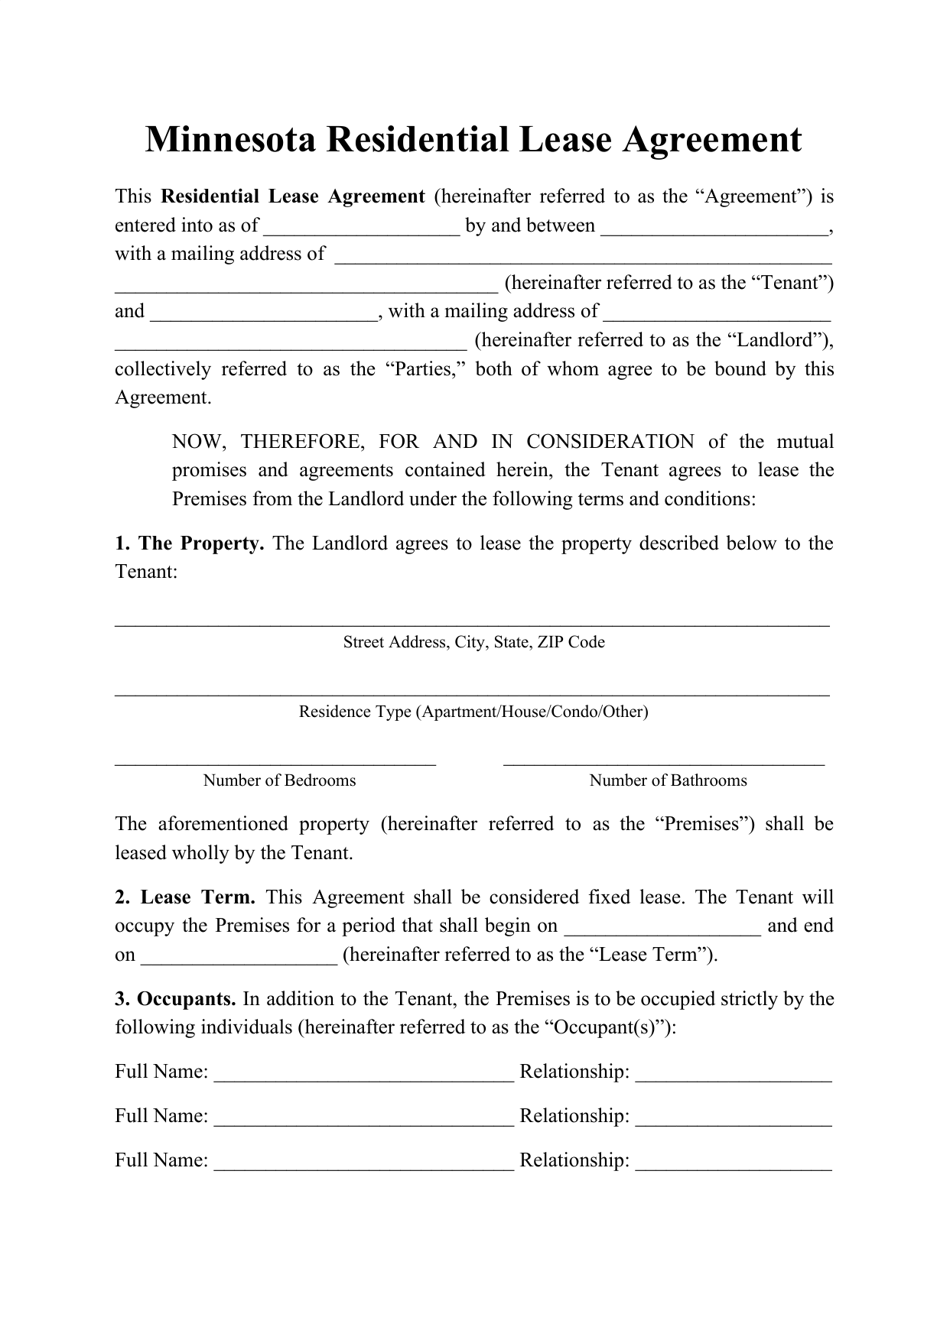 Minnesota Residential Lease Agreement Template Download Printable PDF 